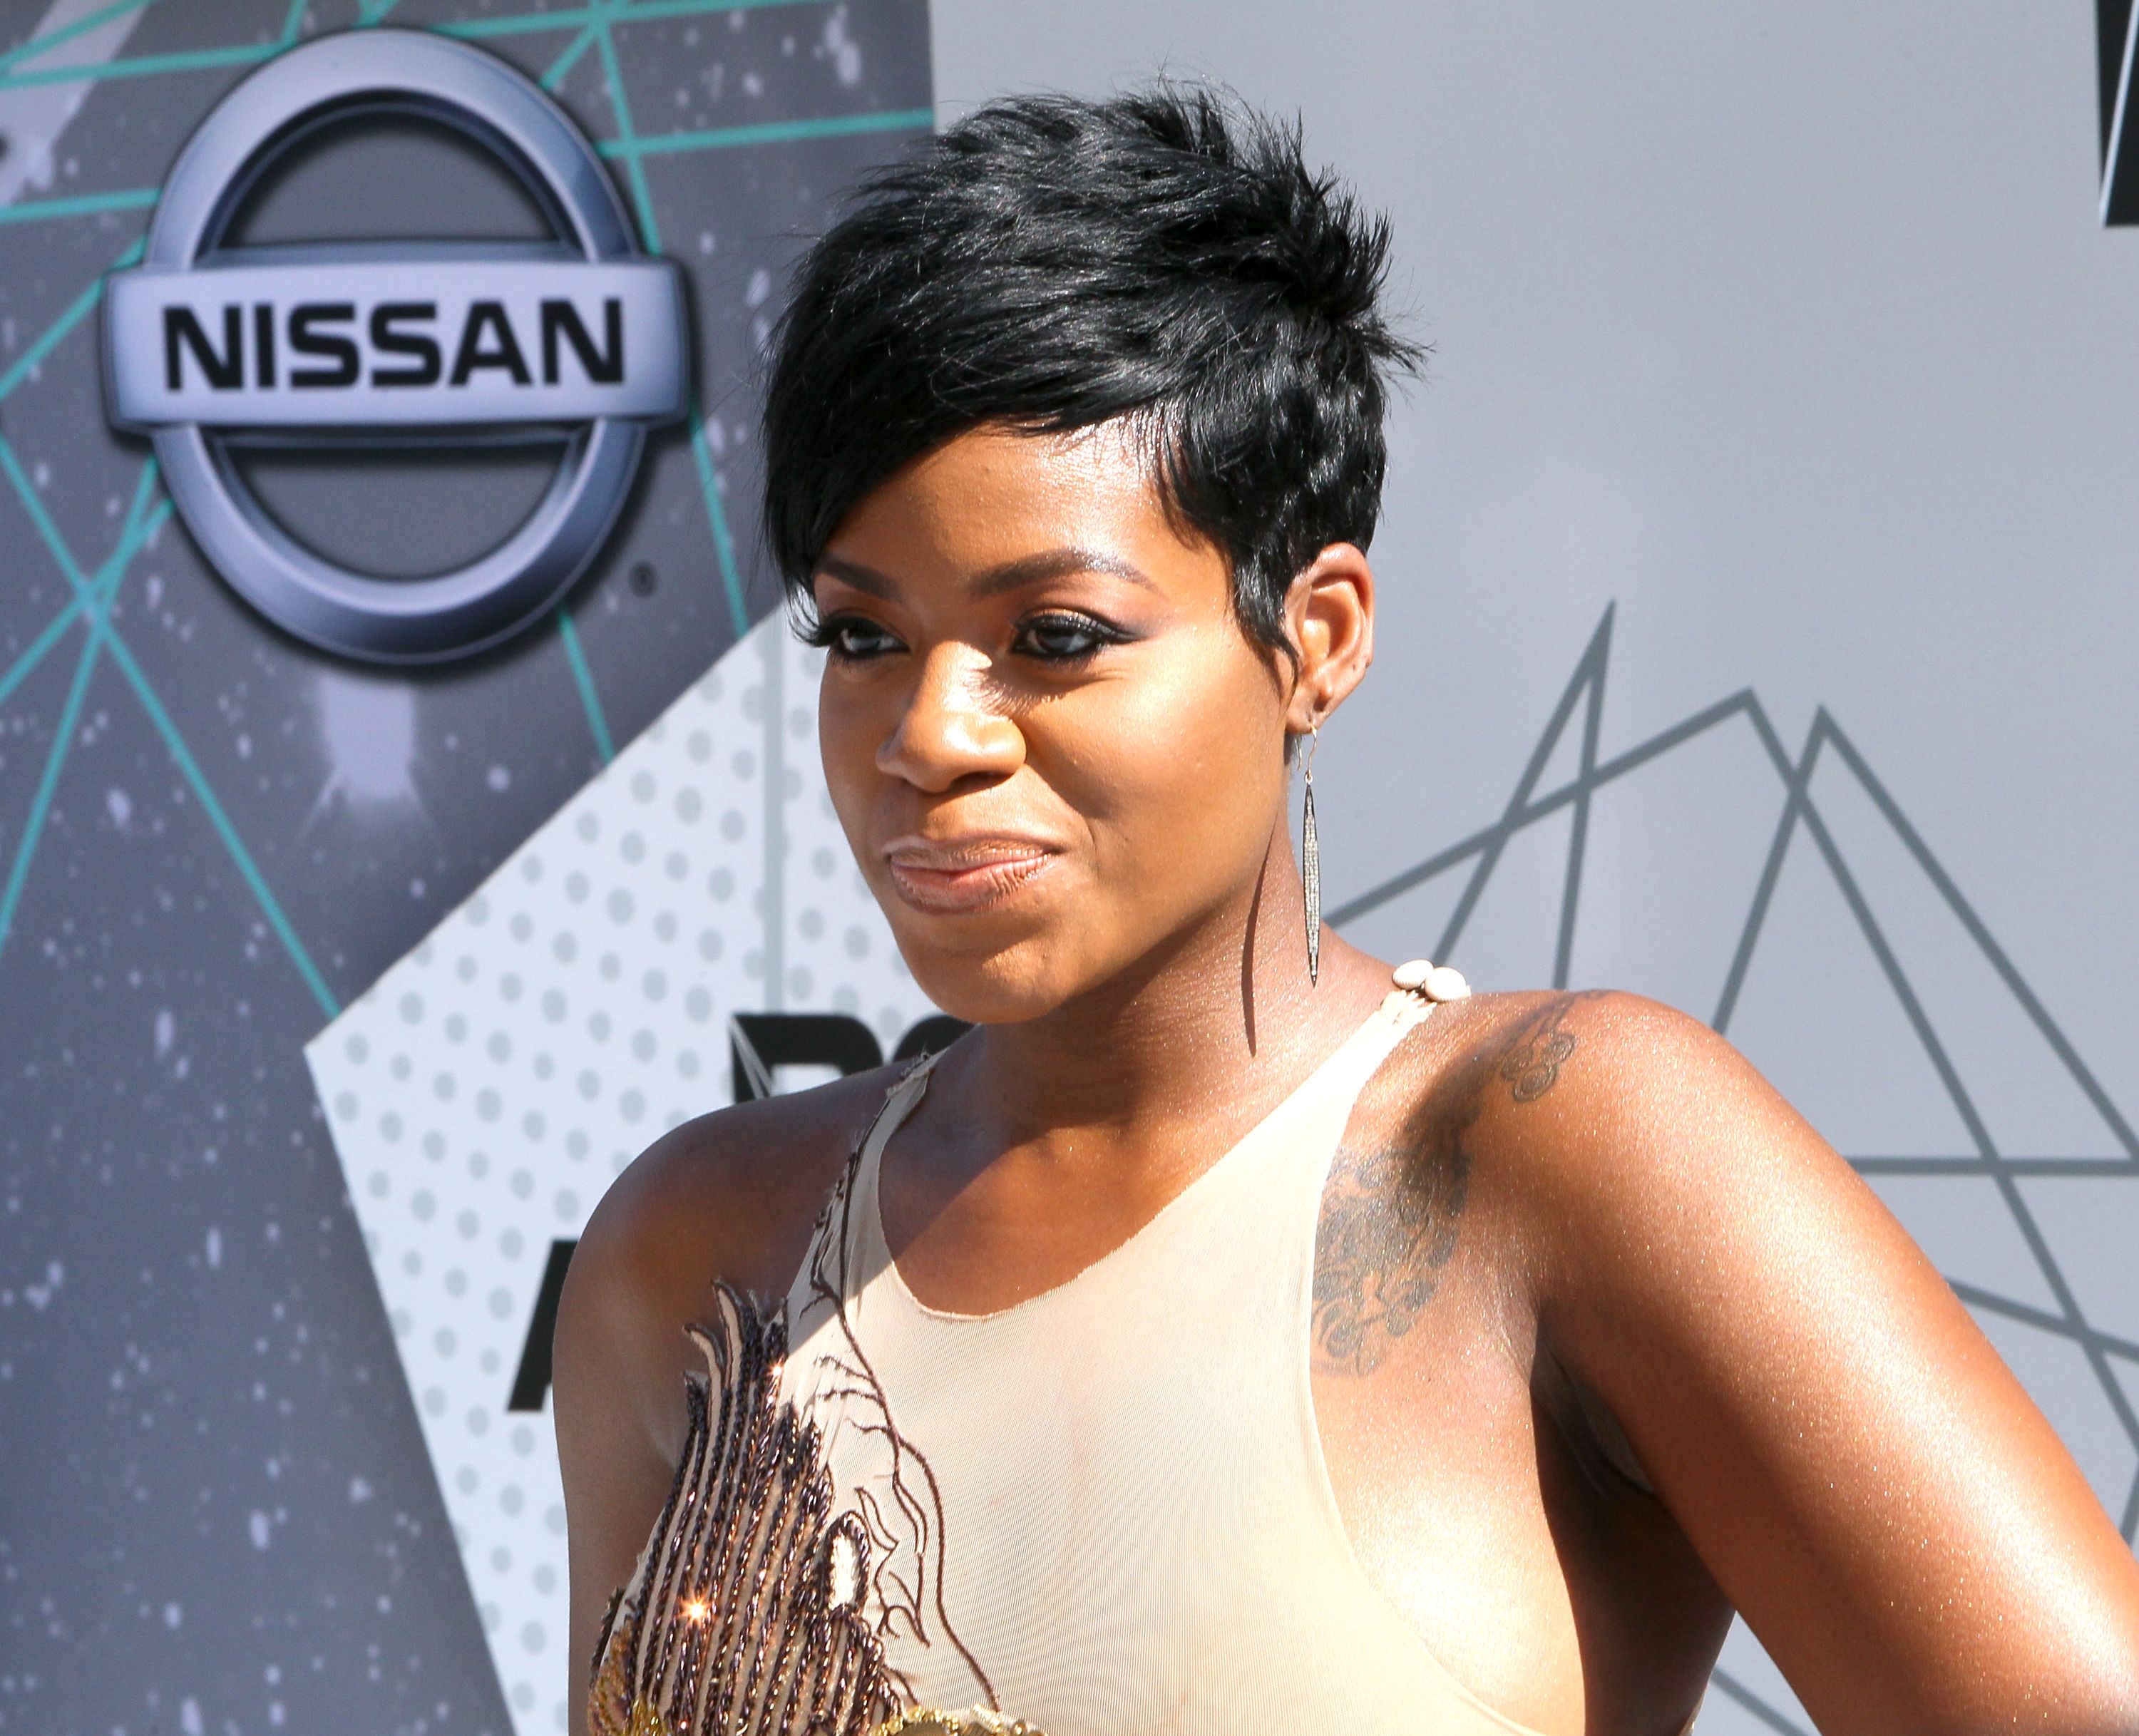 Singer Fantasia Barrino attends the 2016 BET Awards at the Microsoft Theater on June 26, 2016. | Source: Getty Images